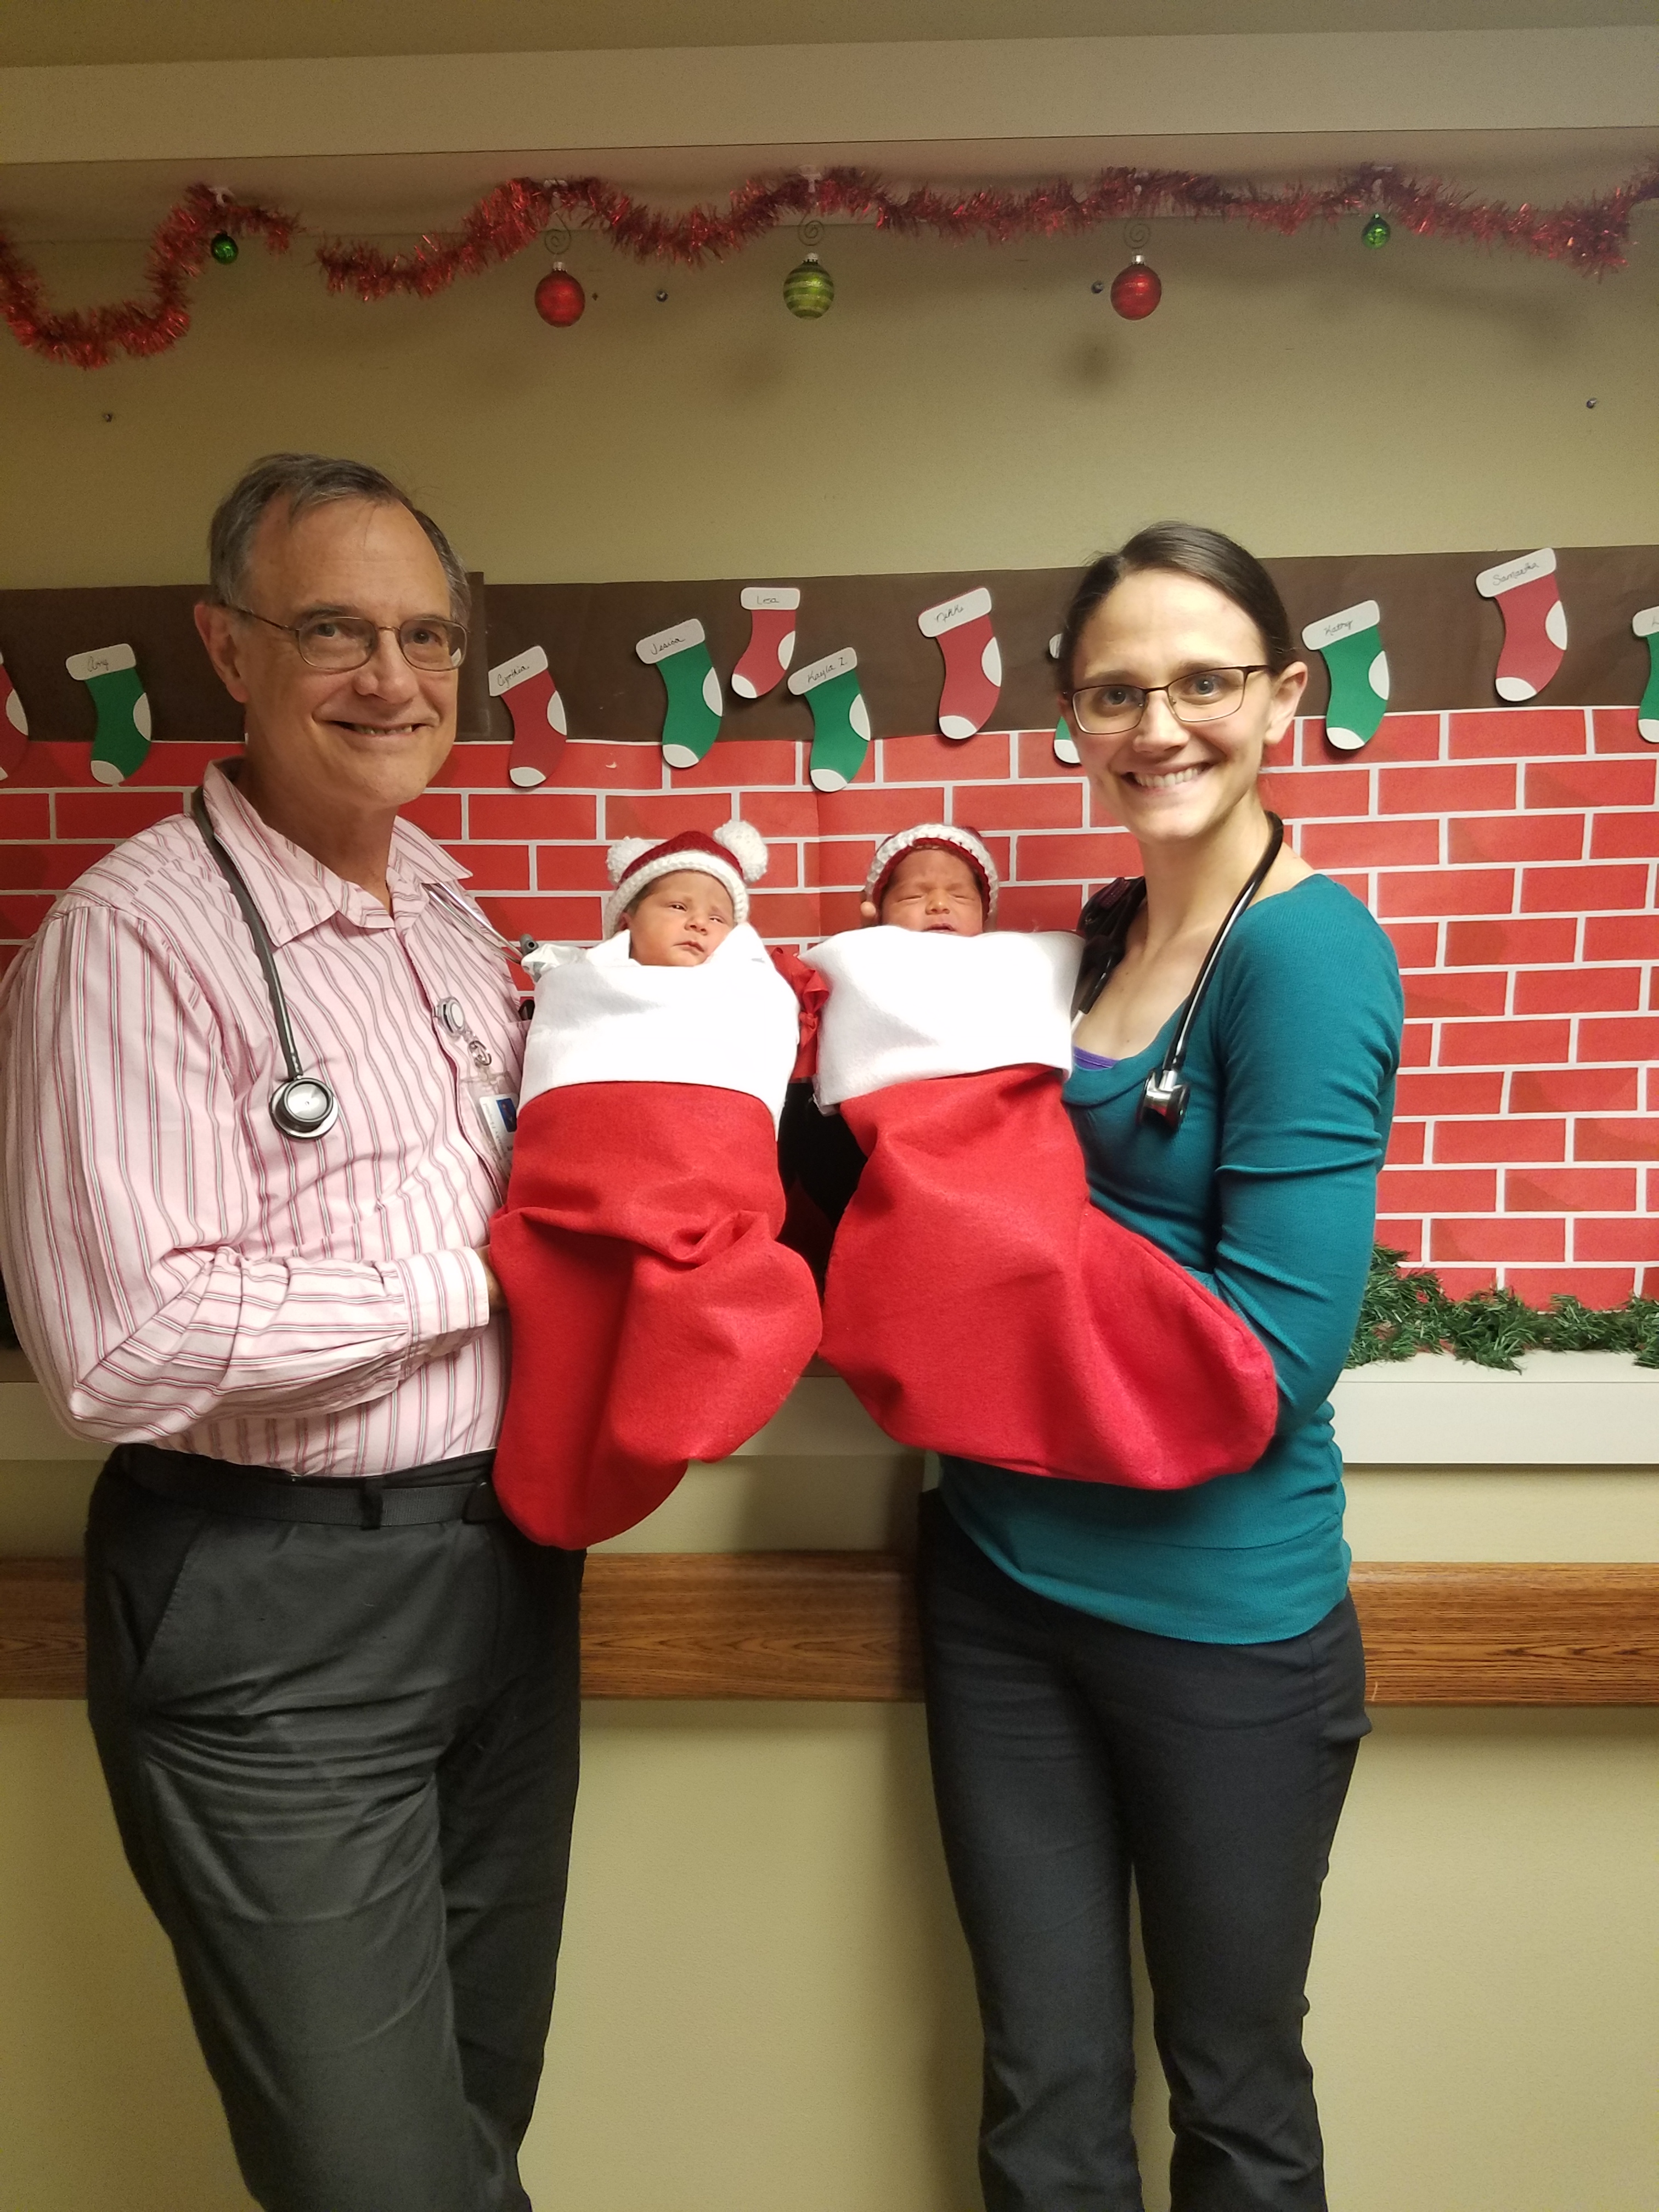 Dr. Ahrendsen and his daughter, Dr. McLoughlin, holding twins